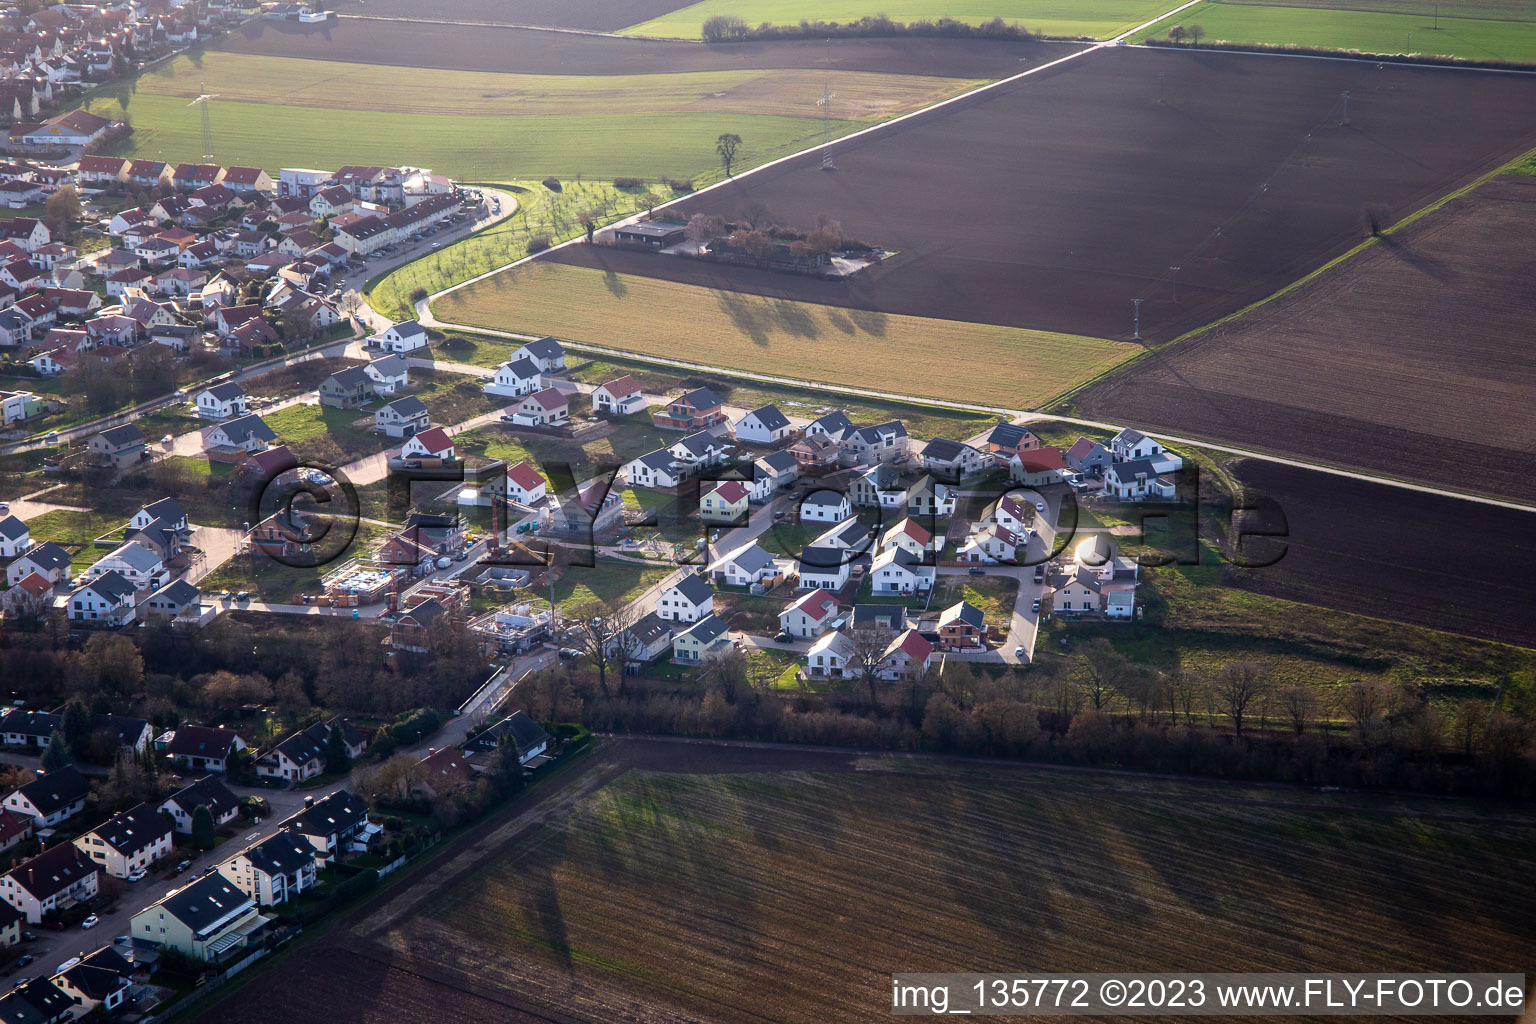 New development area K2 in Kandel in the state Rhineland-Palatinate, Germany from the drone perspective